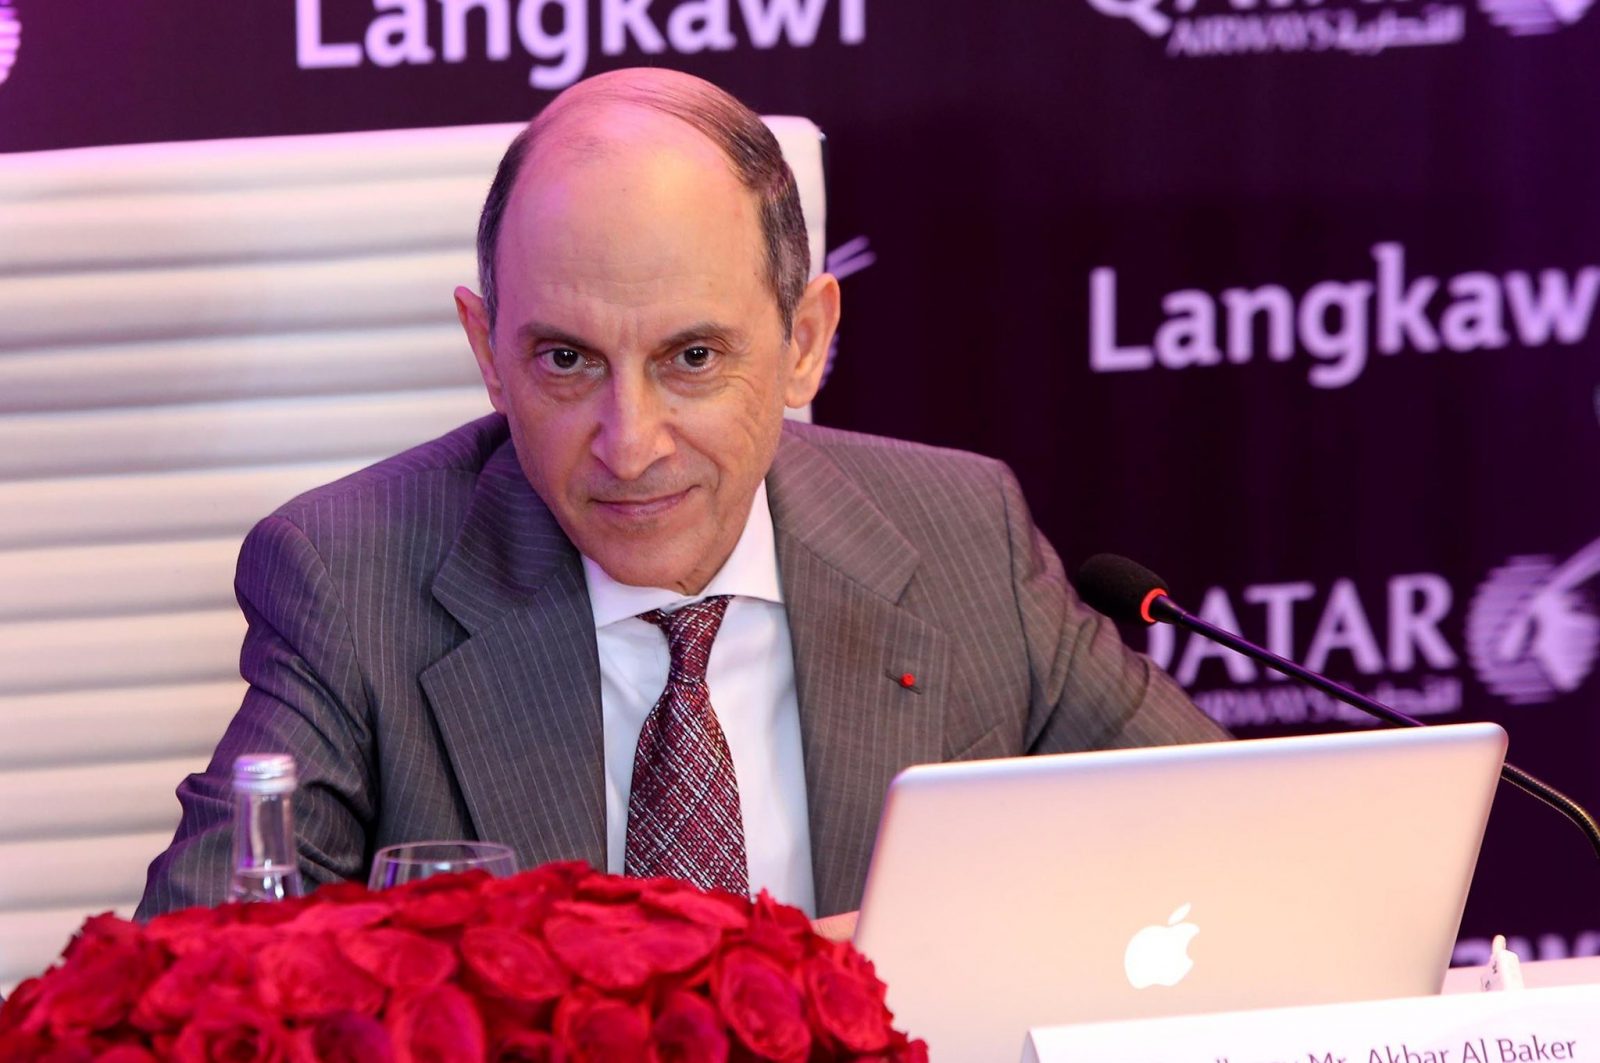 Qatar Airways Keeps Up Pressure On Delta Air Ways; Says It Could Increase Stake in LATAM